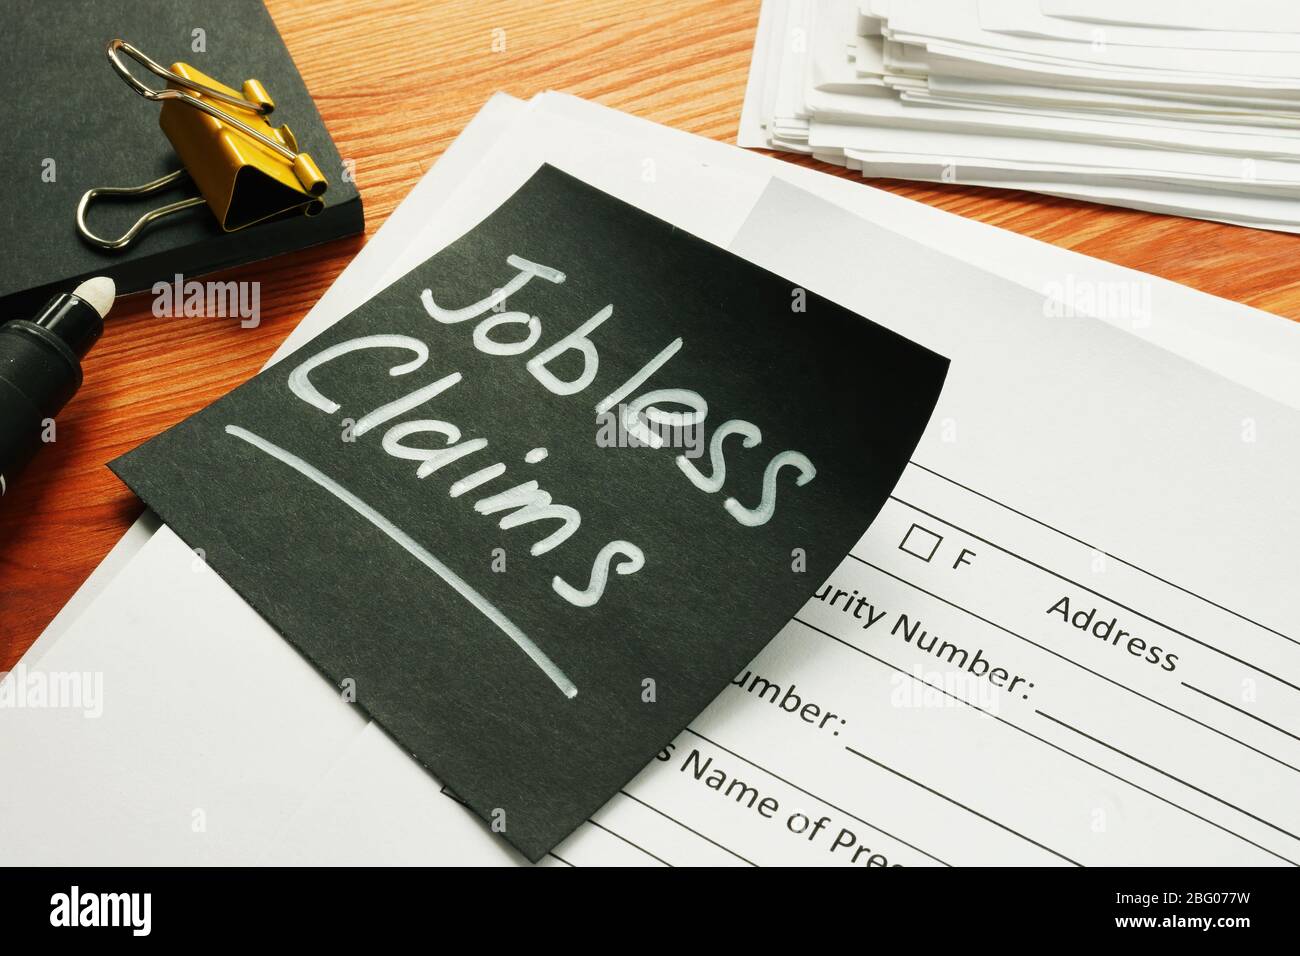 Jobless claims memo stick and pile of documents. Stock Photo